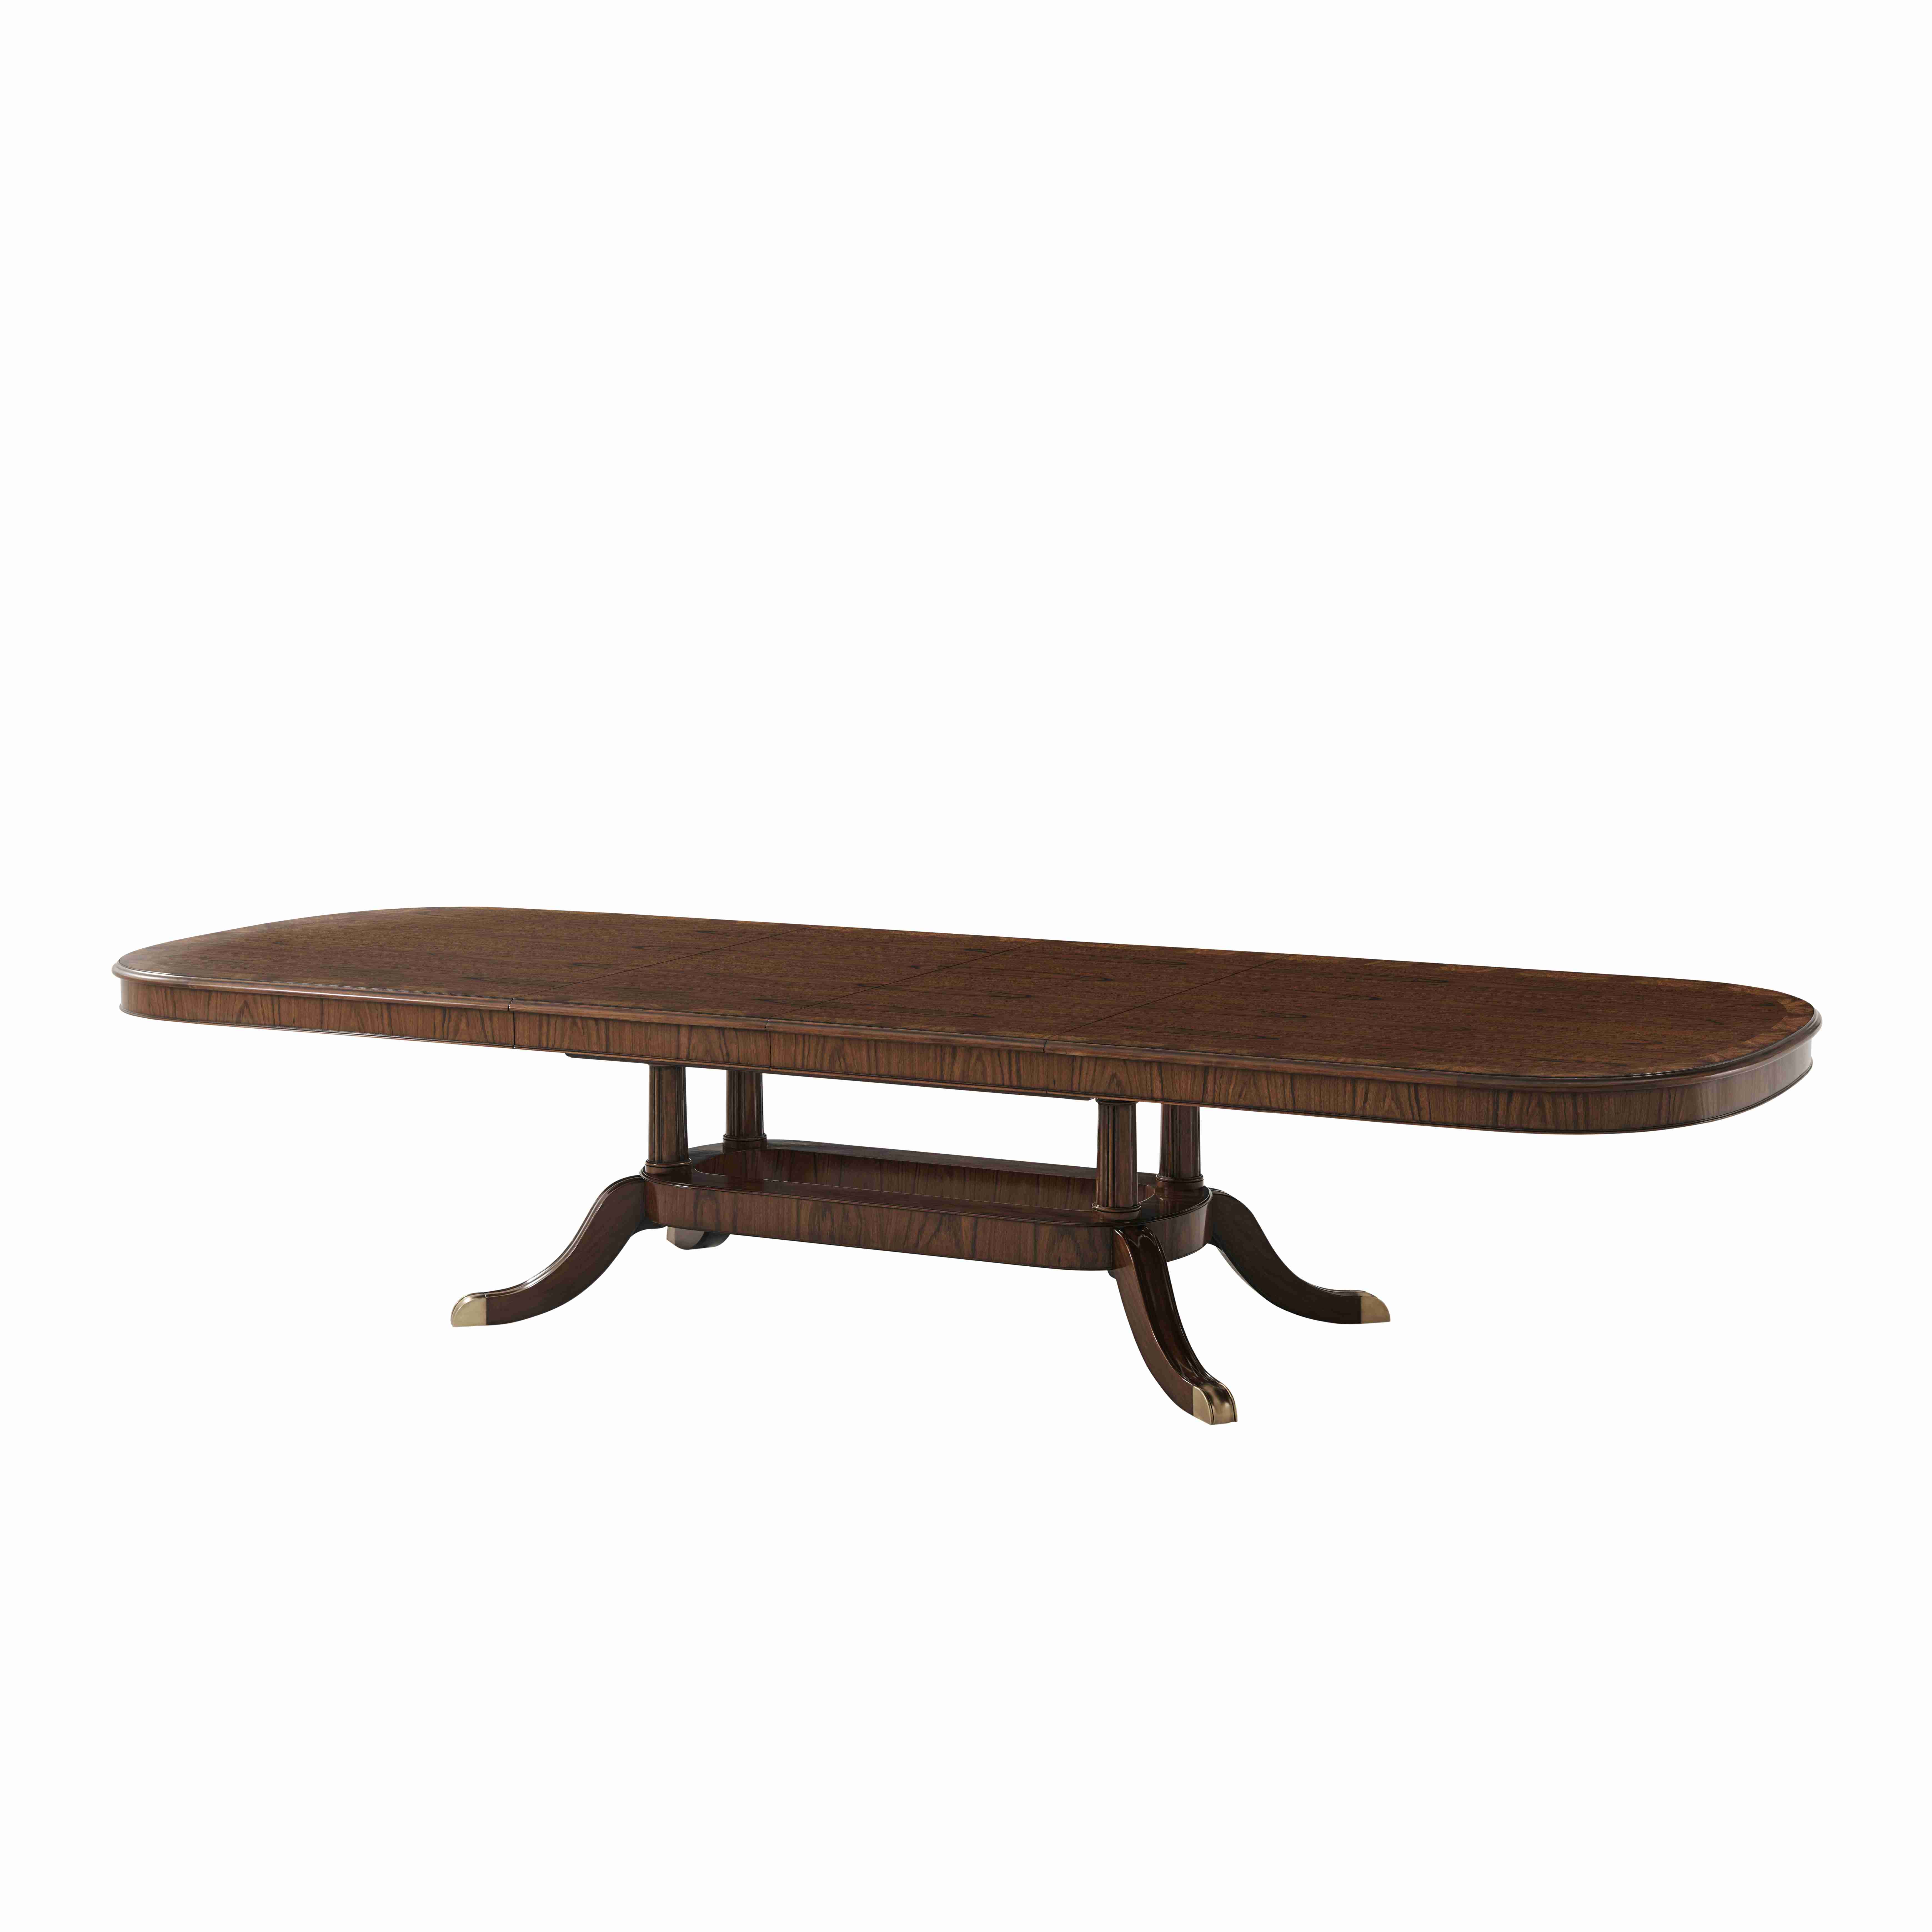 THE WEYBOURNE DINING TABLE